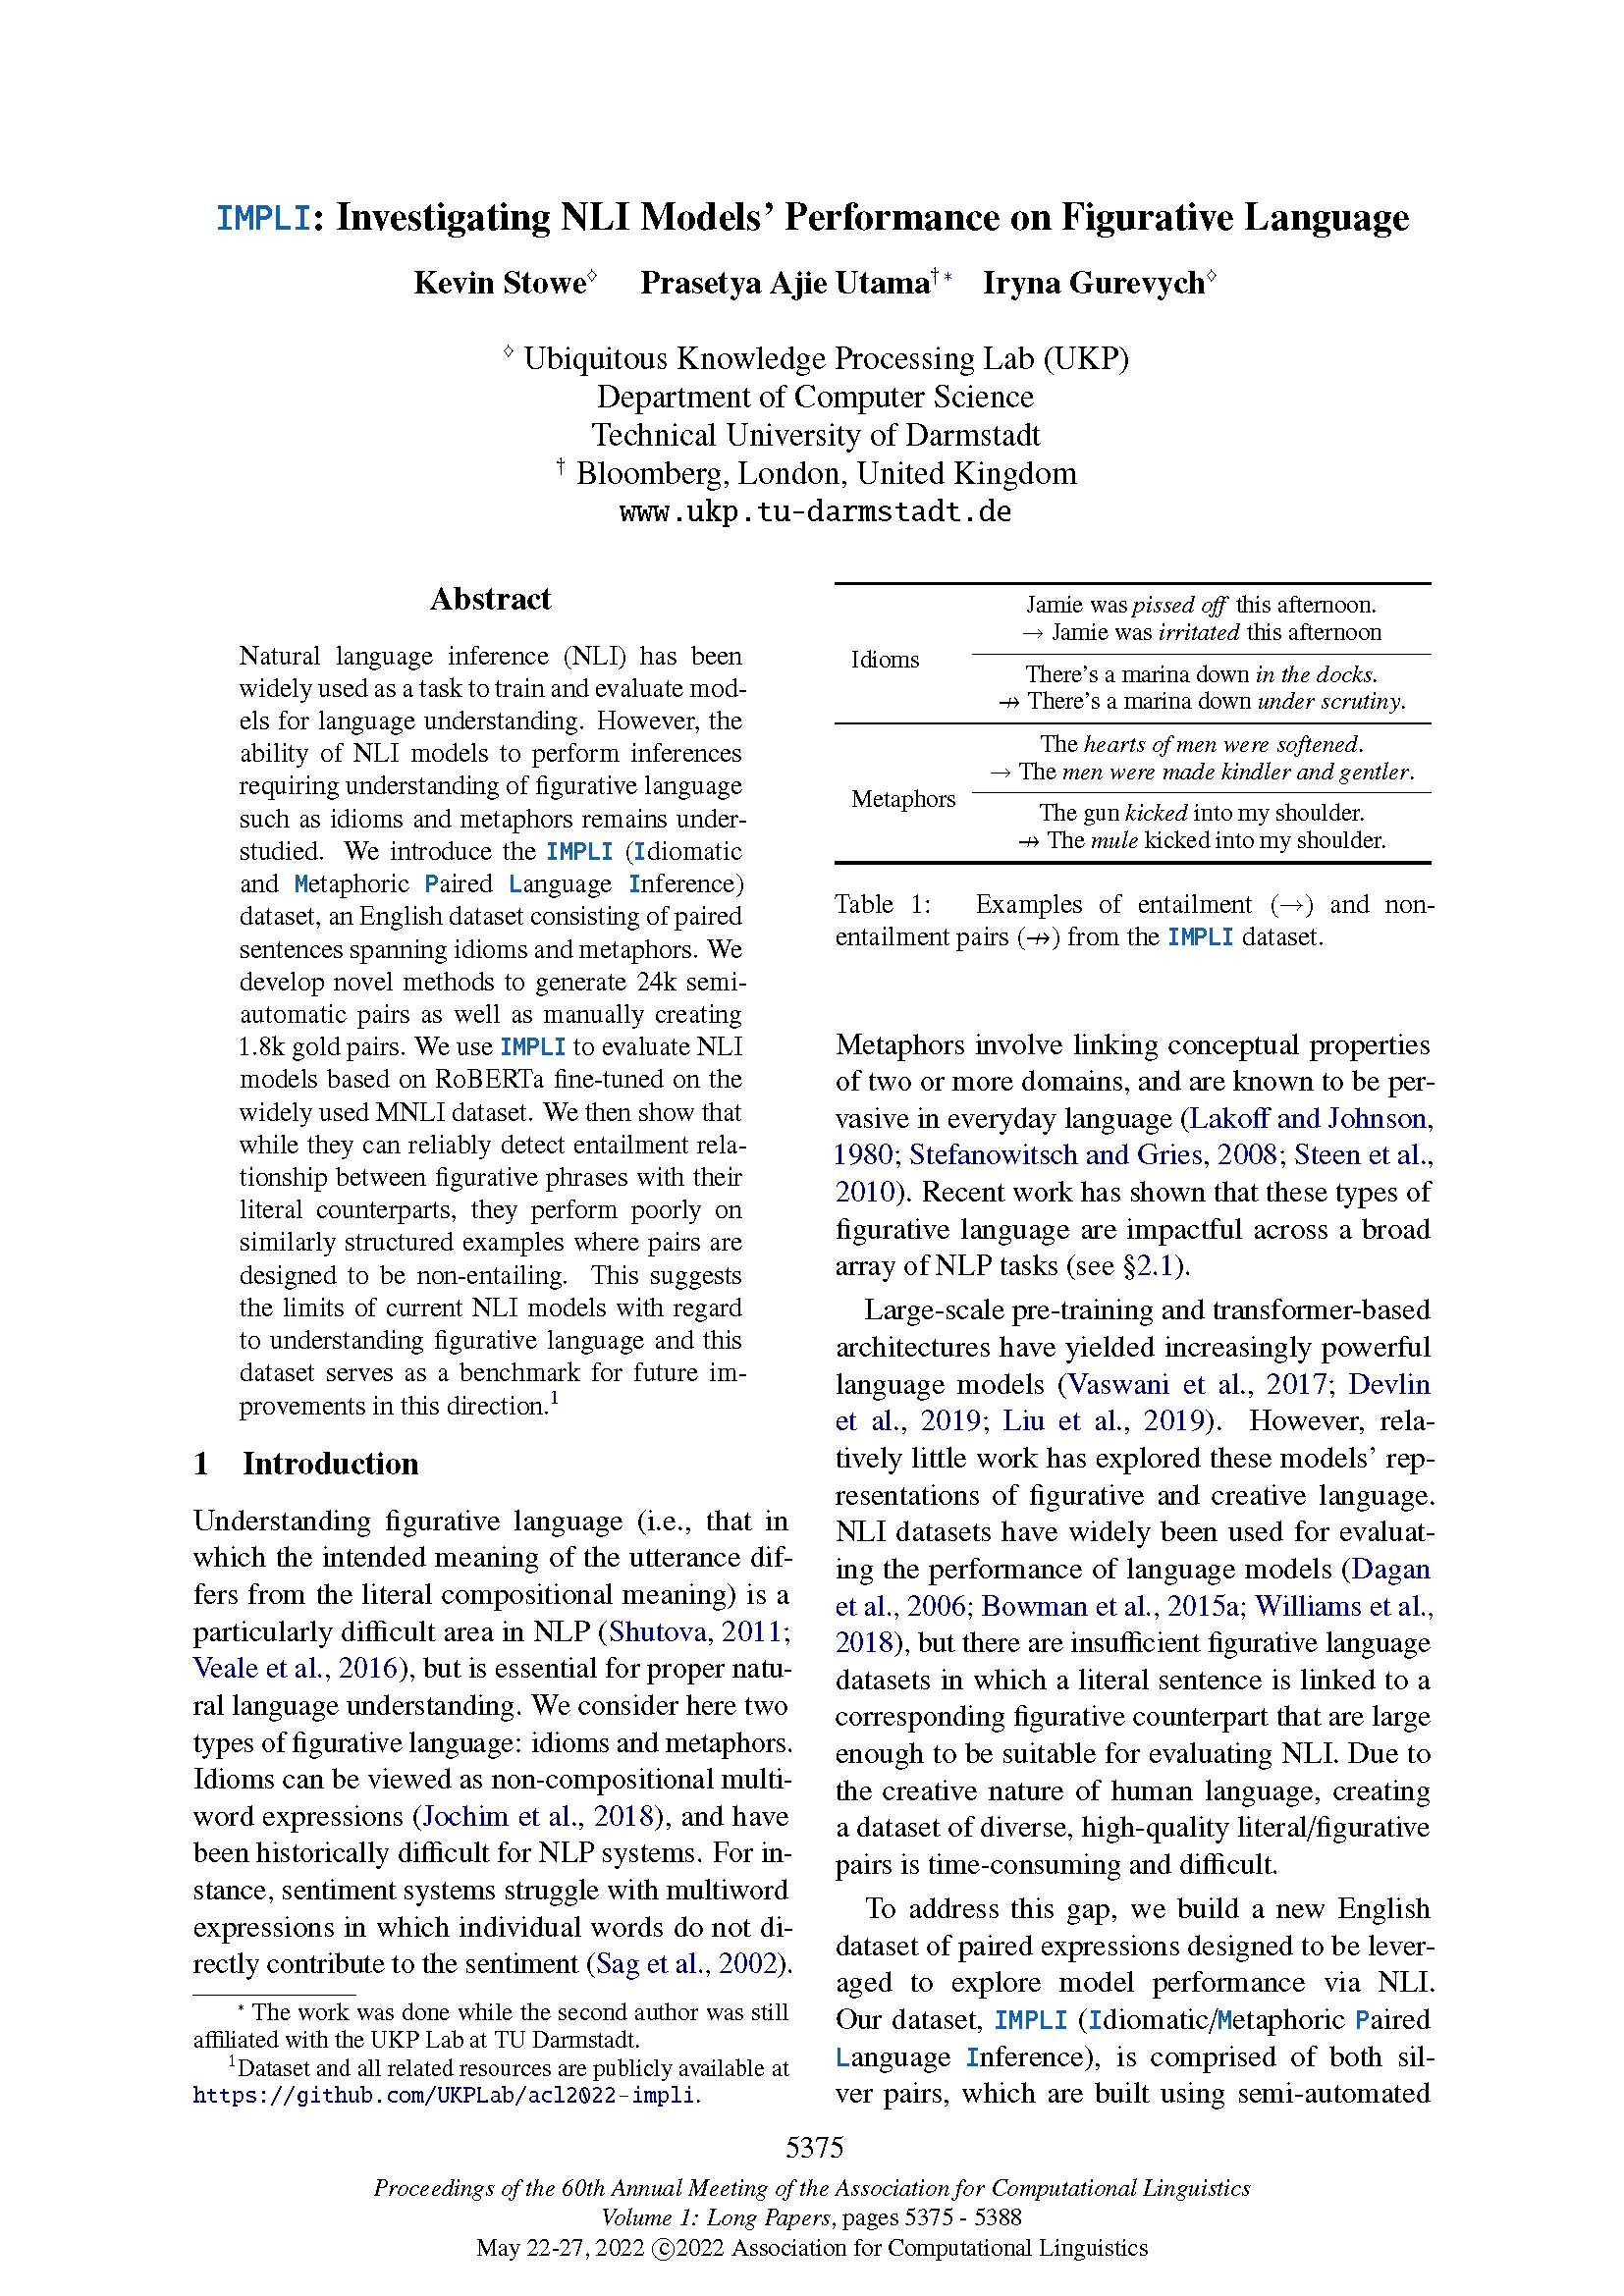 Front page of paper published at ACL 2022 titled "IMPLI: Investigating NLI Models’ Performance on Figurative Language."